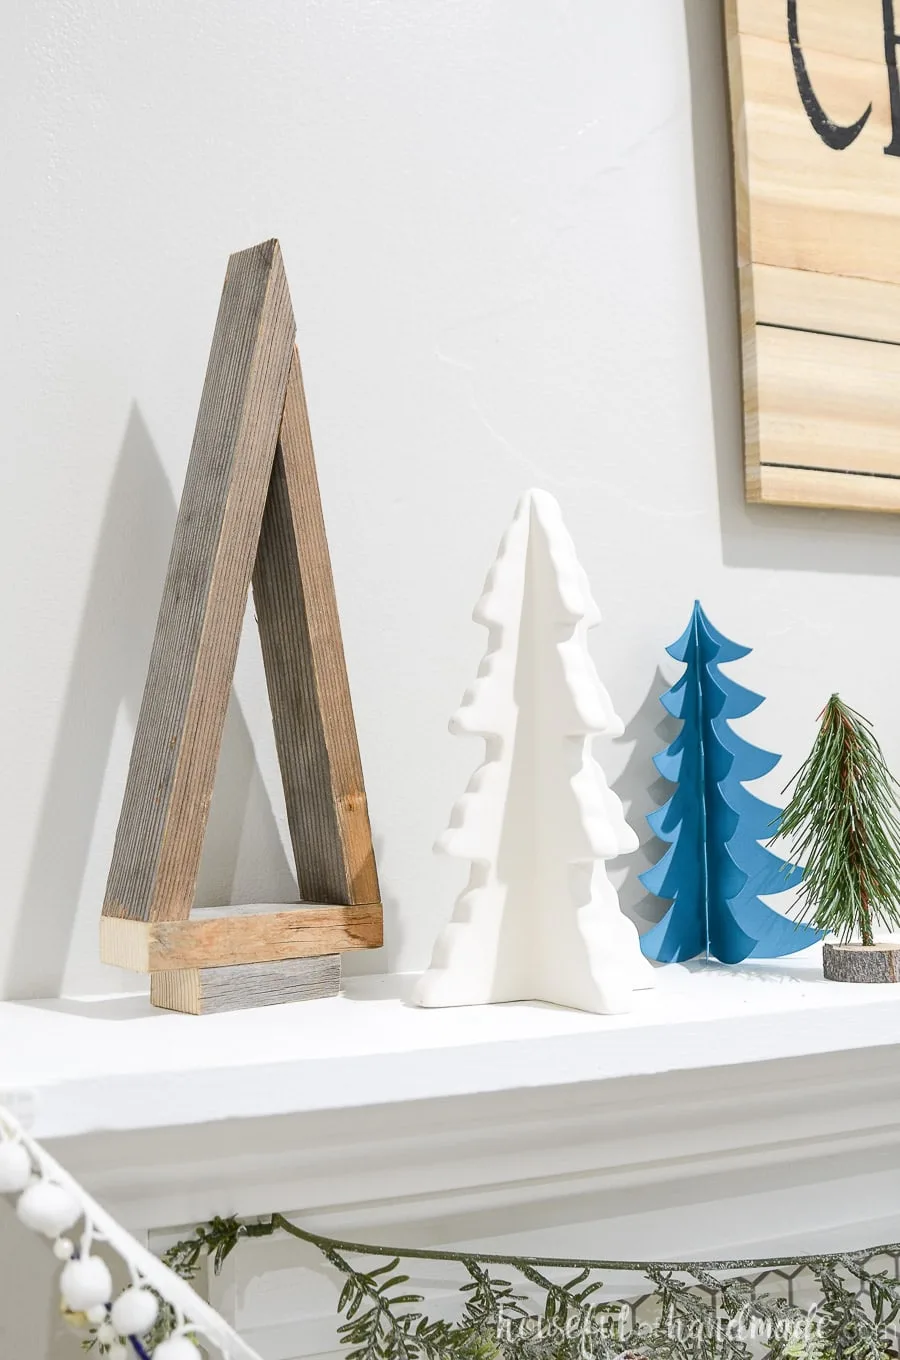 Reclaimed wood Christmas tree on a mantel next to other decorative Christmas trees.